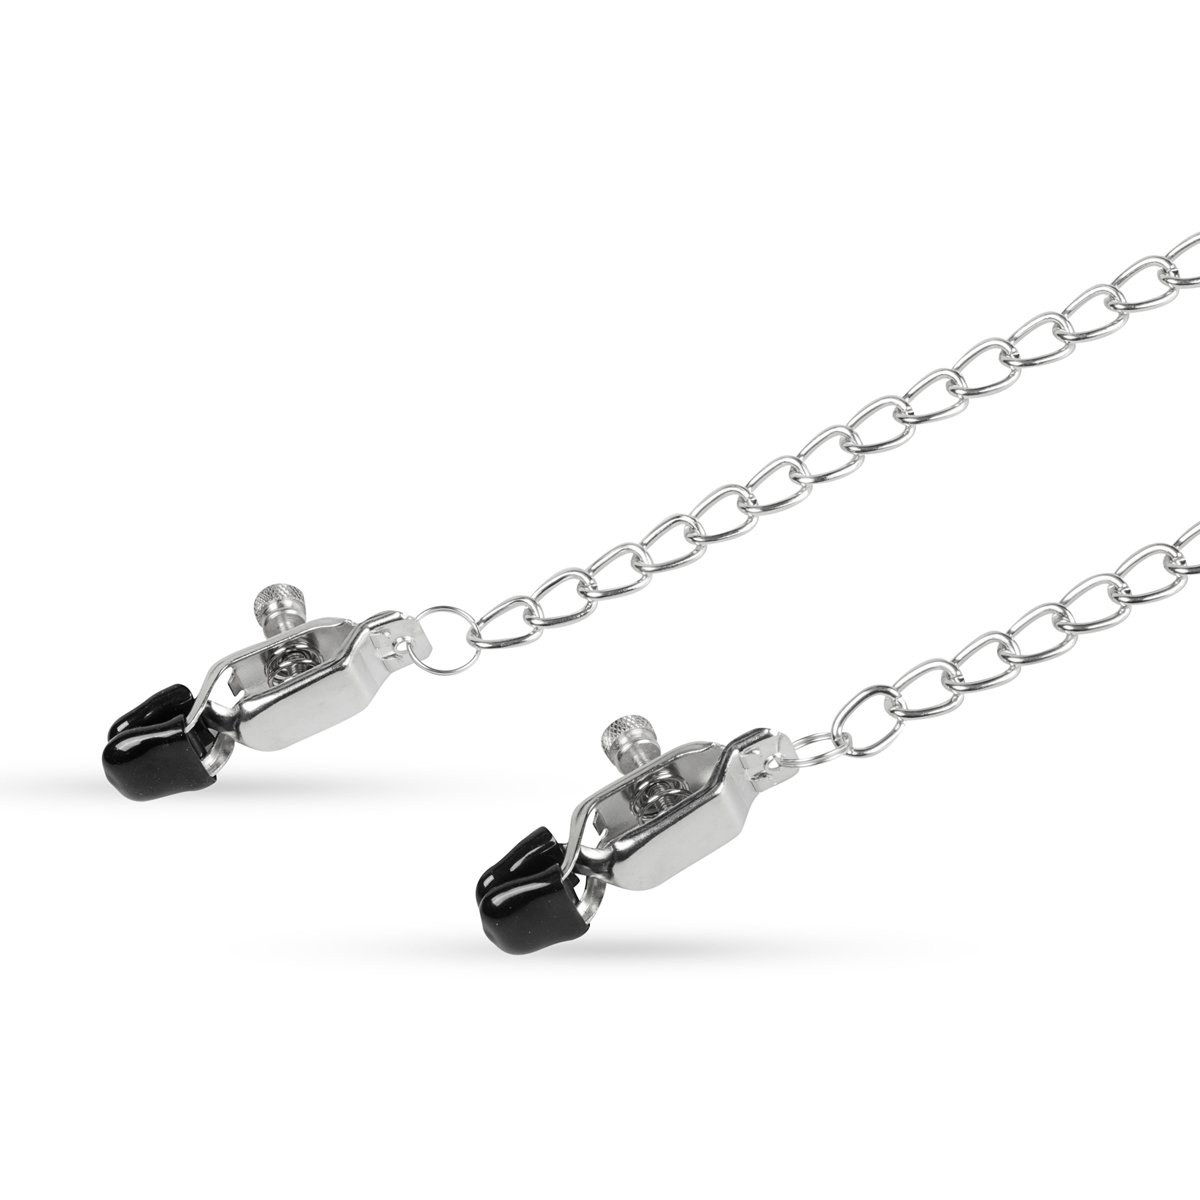 Big Nipple Clamps with Chain